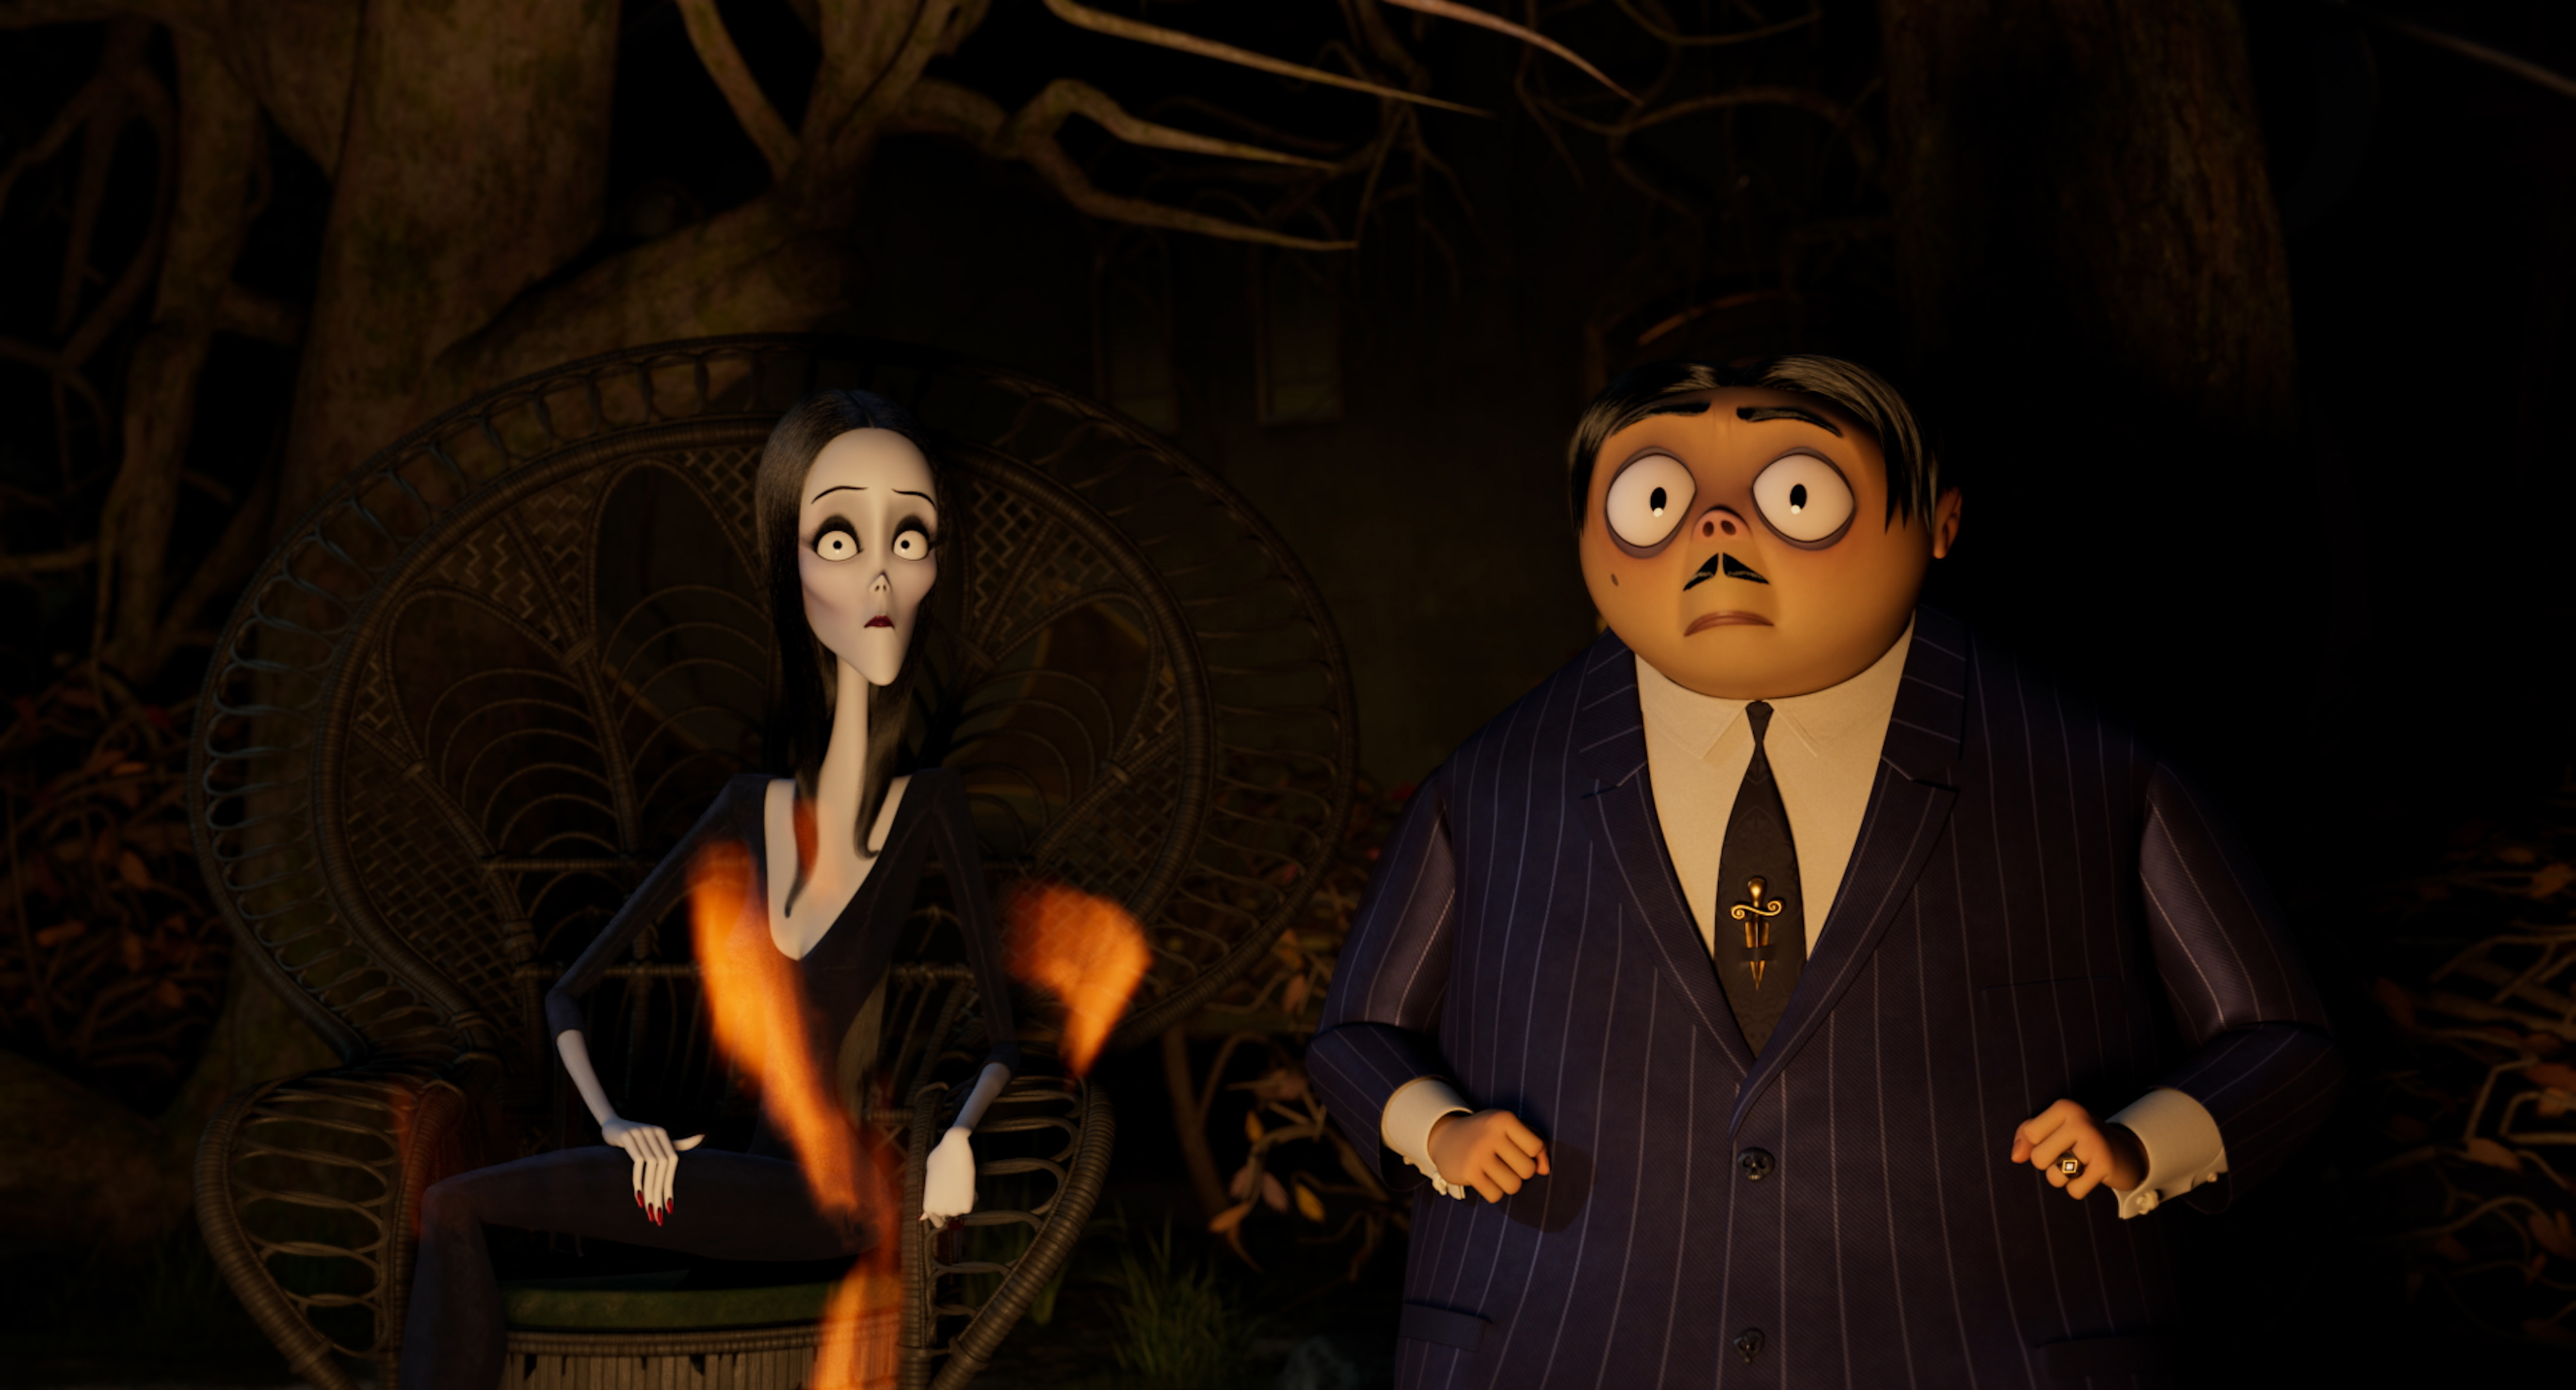 Movie The Addams Family 2 HD Wallpaper | Background Image